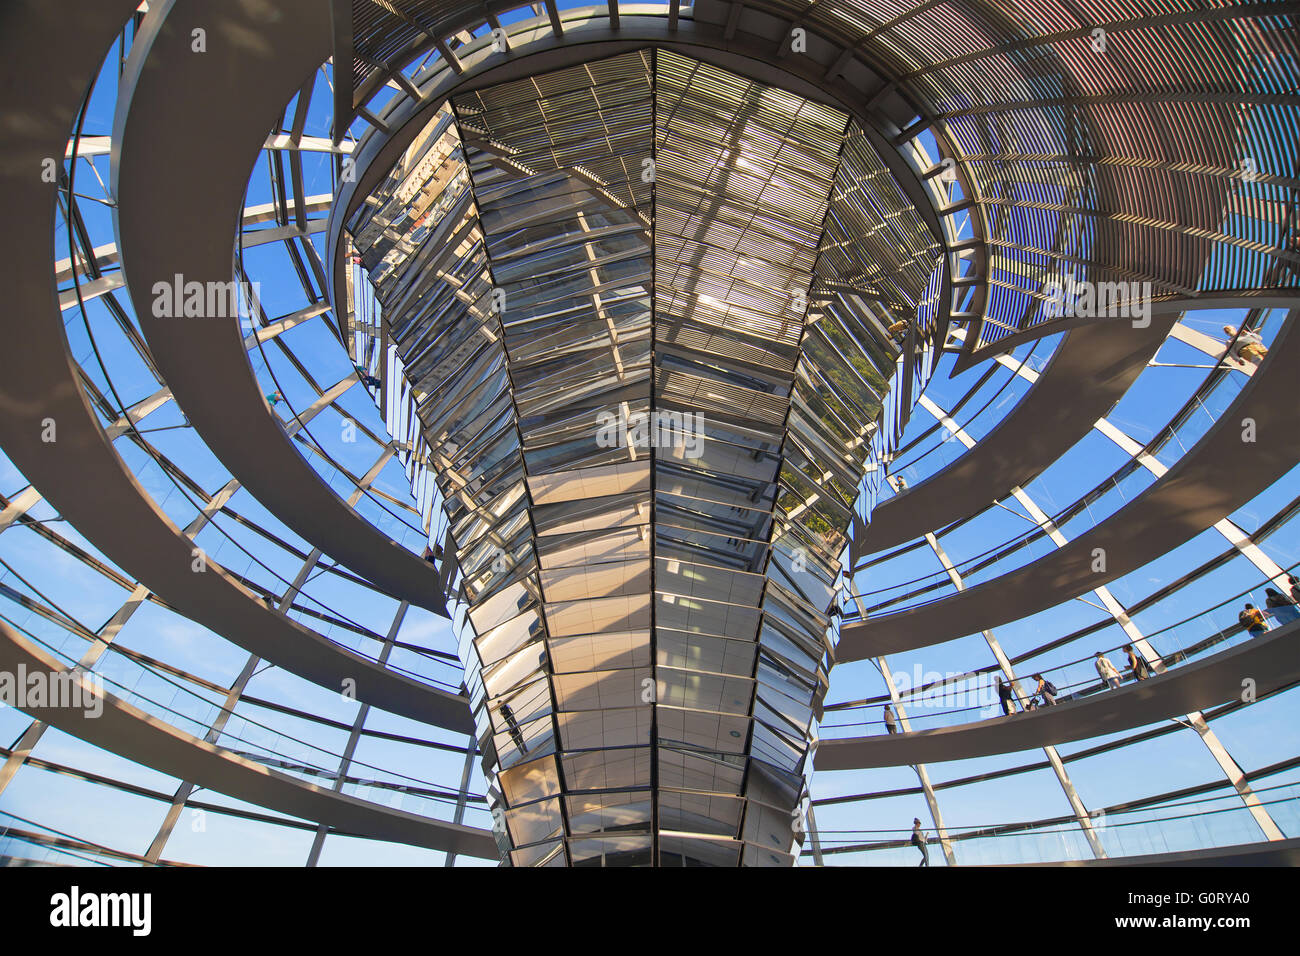 Interior of the Reichstag Dome in Berlin, Germany. Stock Photo